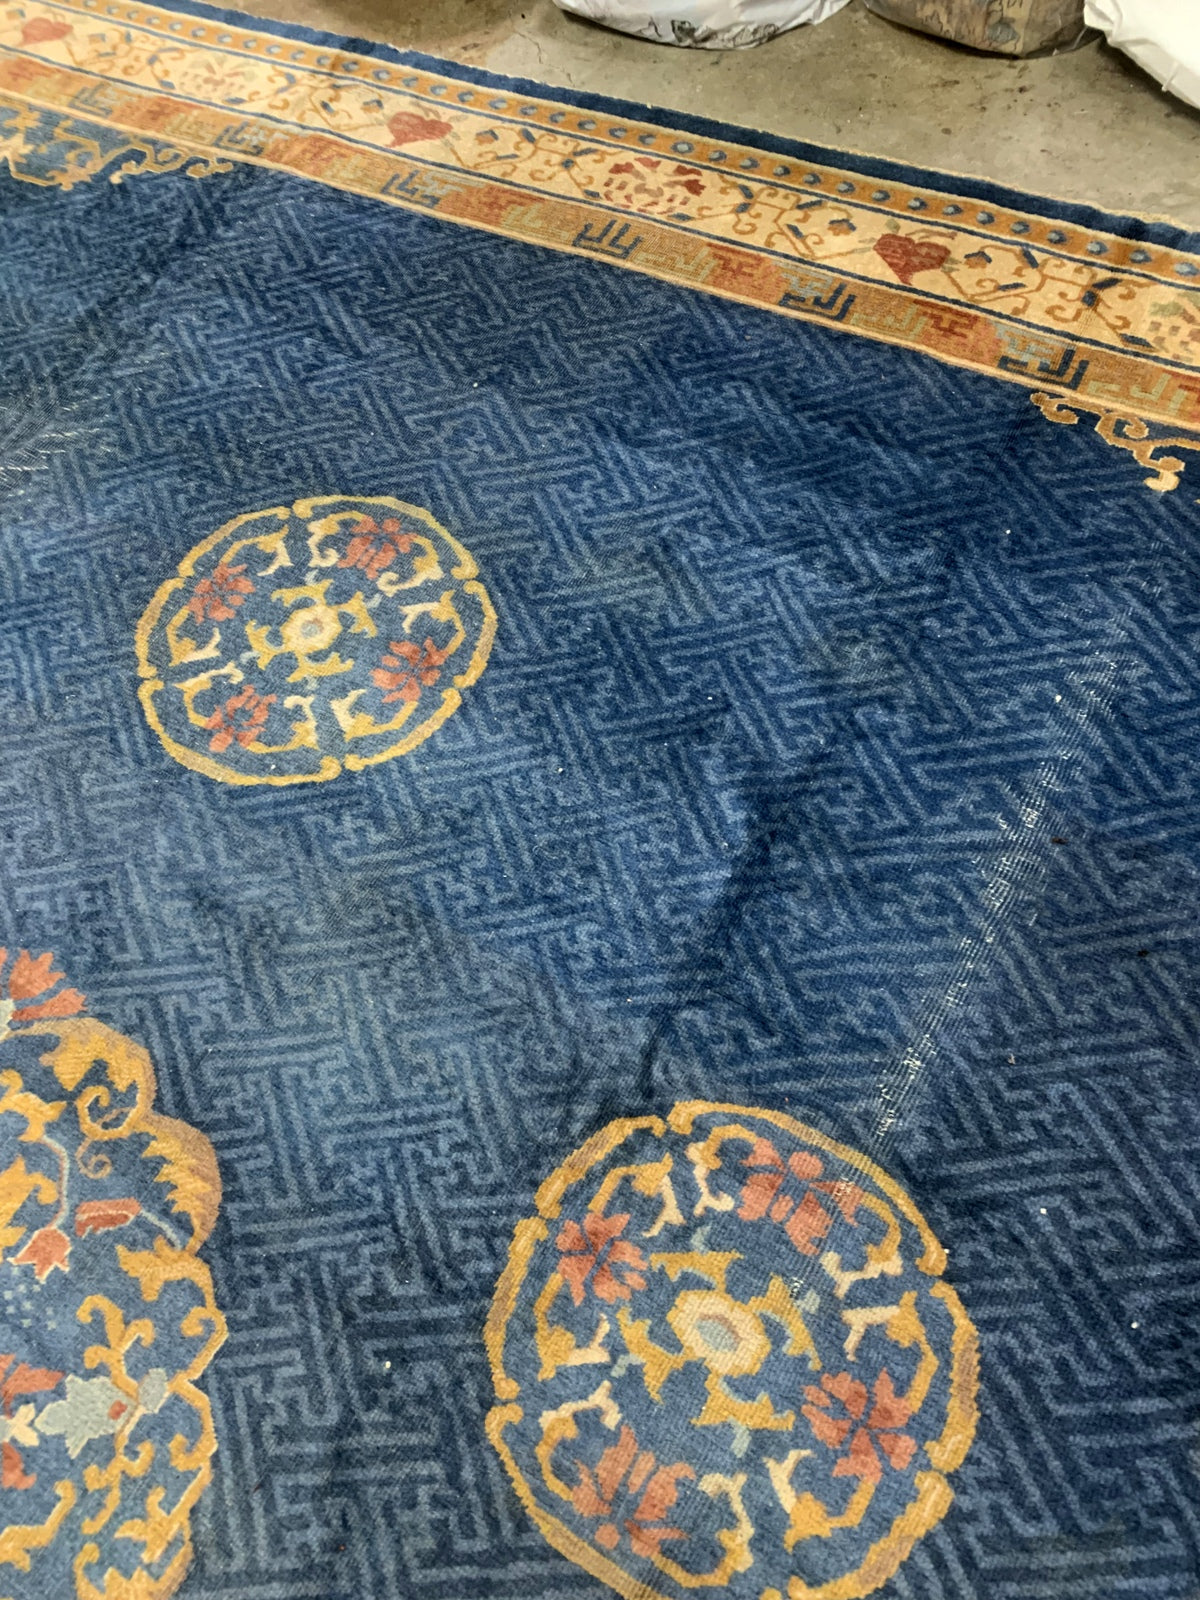 Handmade antique Peking Chinese rug in blue and beige colors. The rug is from the beginning of 20th century in original condition, it has some distressed areas.